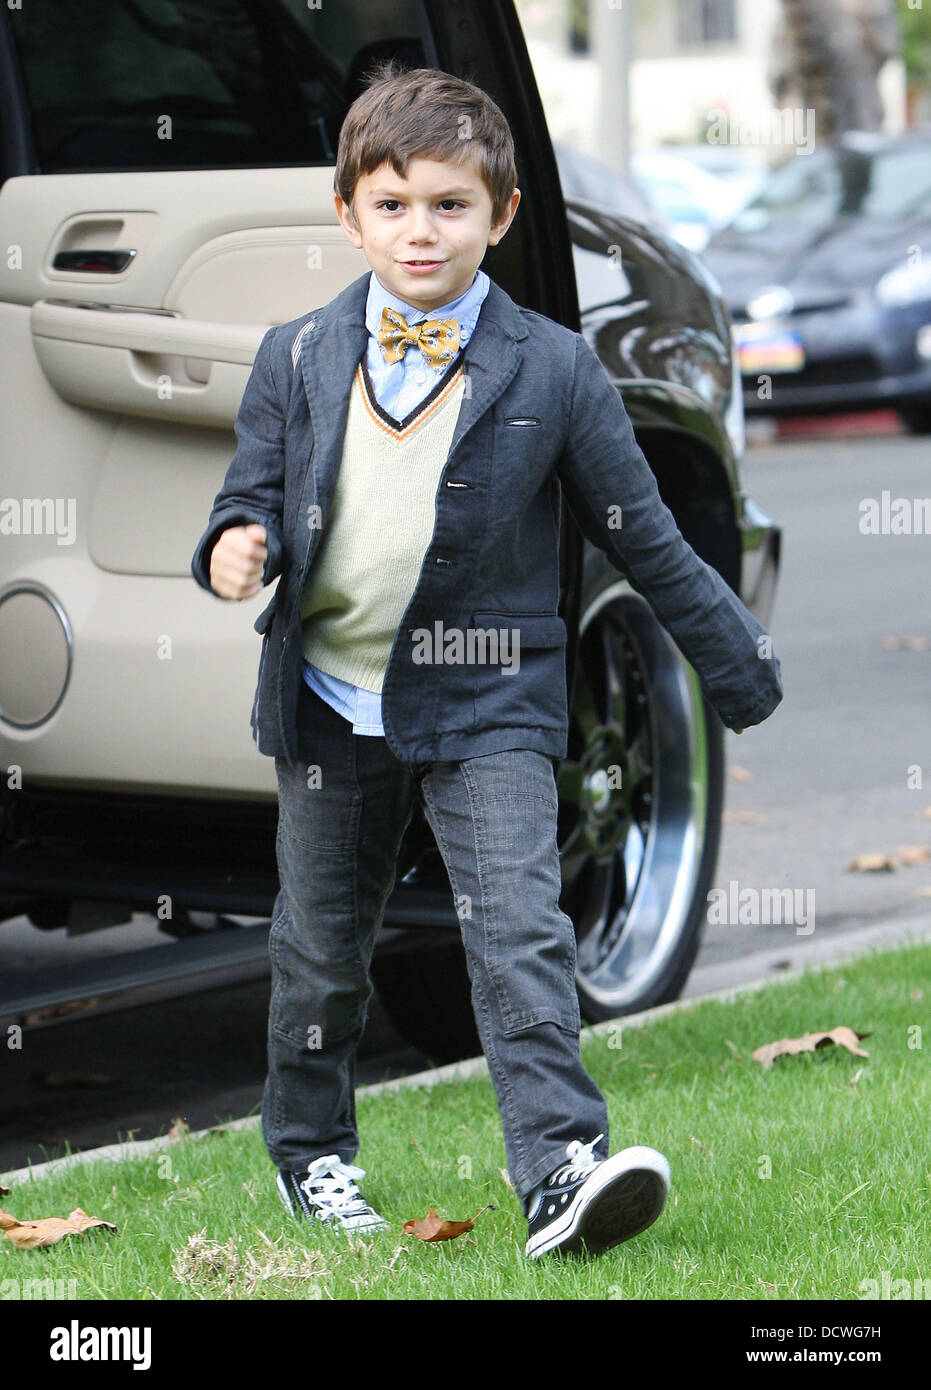 Gwen Stefani's son Kingston Rossdale arrives at his grandparents home to  celebrate Thanksgiving Los Angeles, California - 24.11.11 Stock Photo -  Alamy